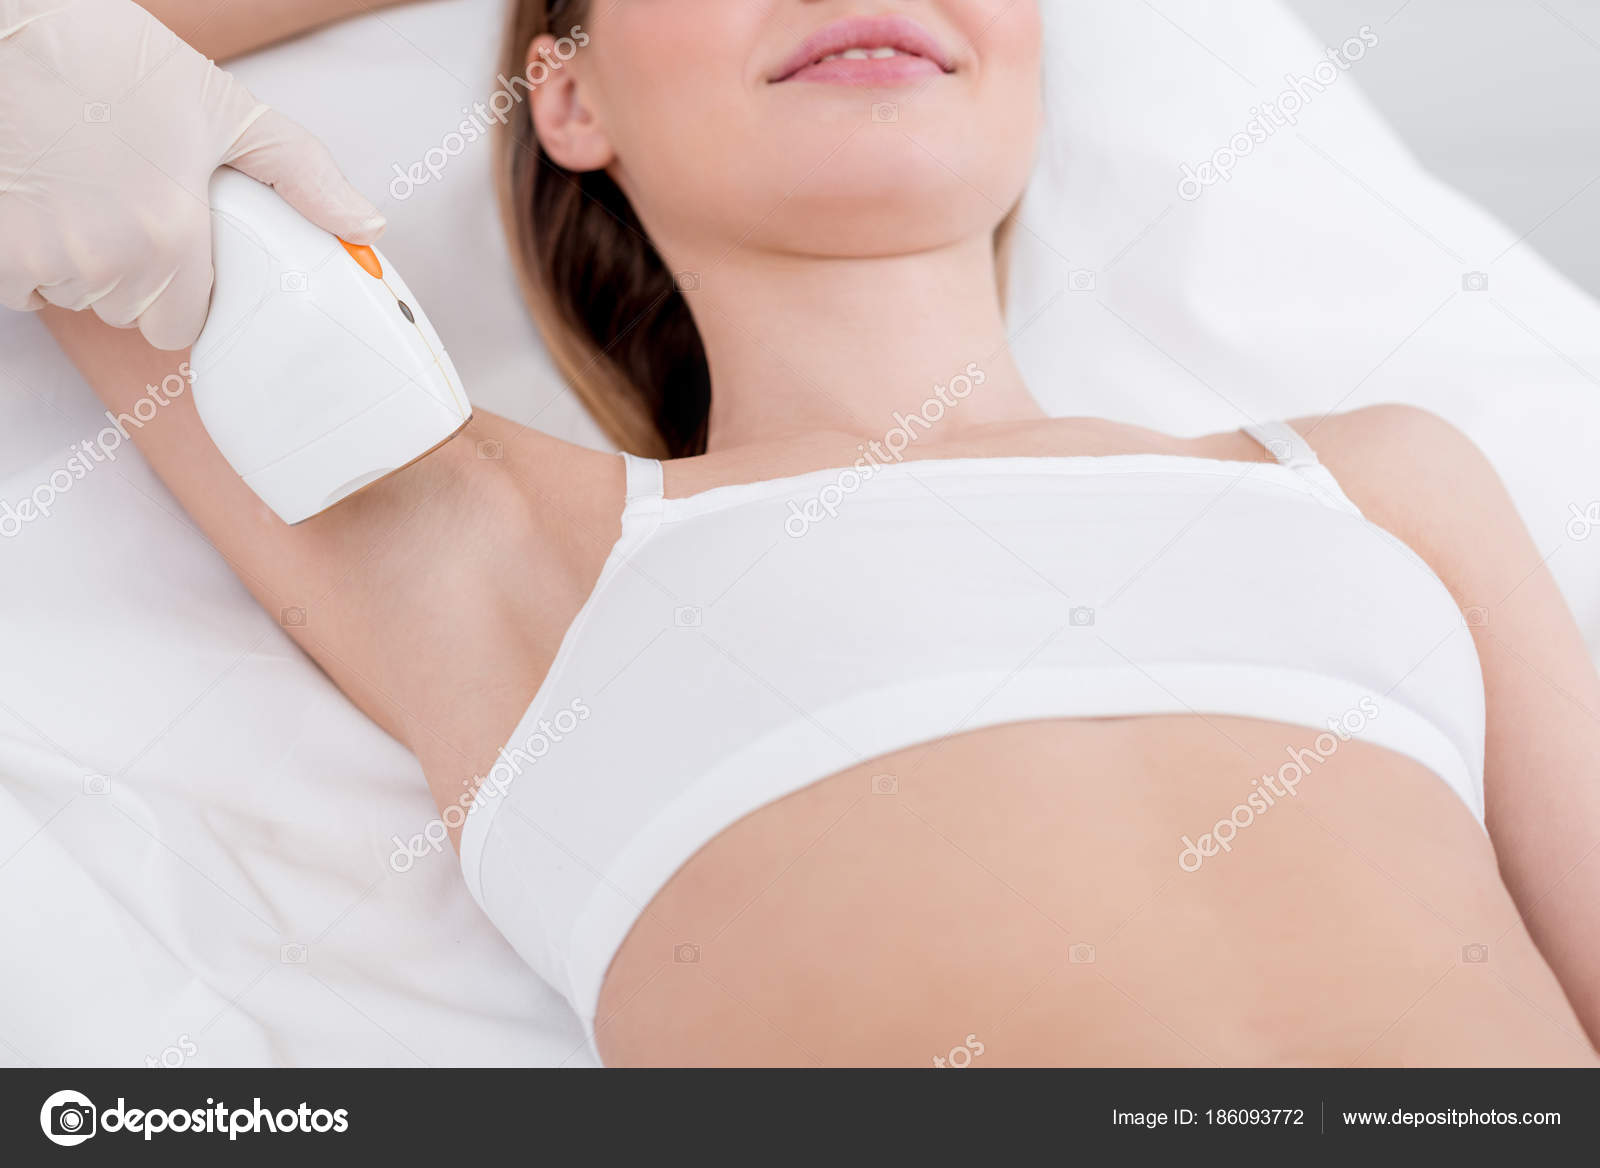 Partial View Woman Getting Laser Hair Removal Epilation Armpit